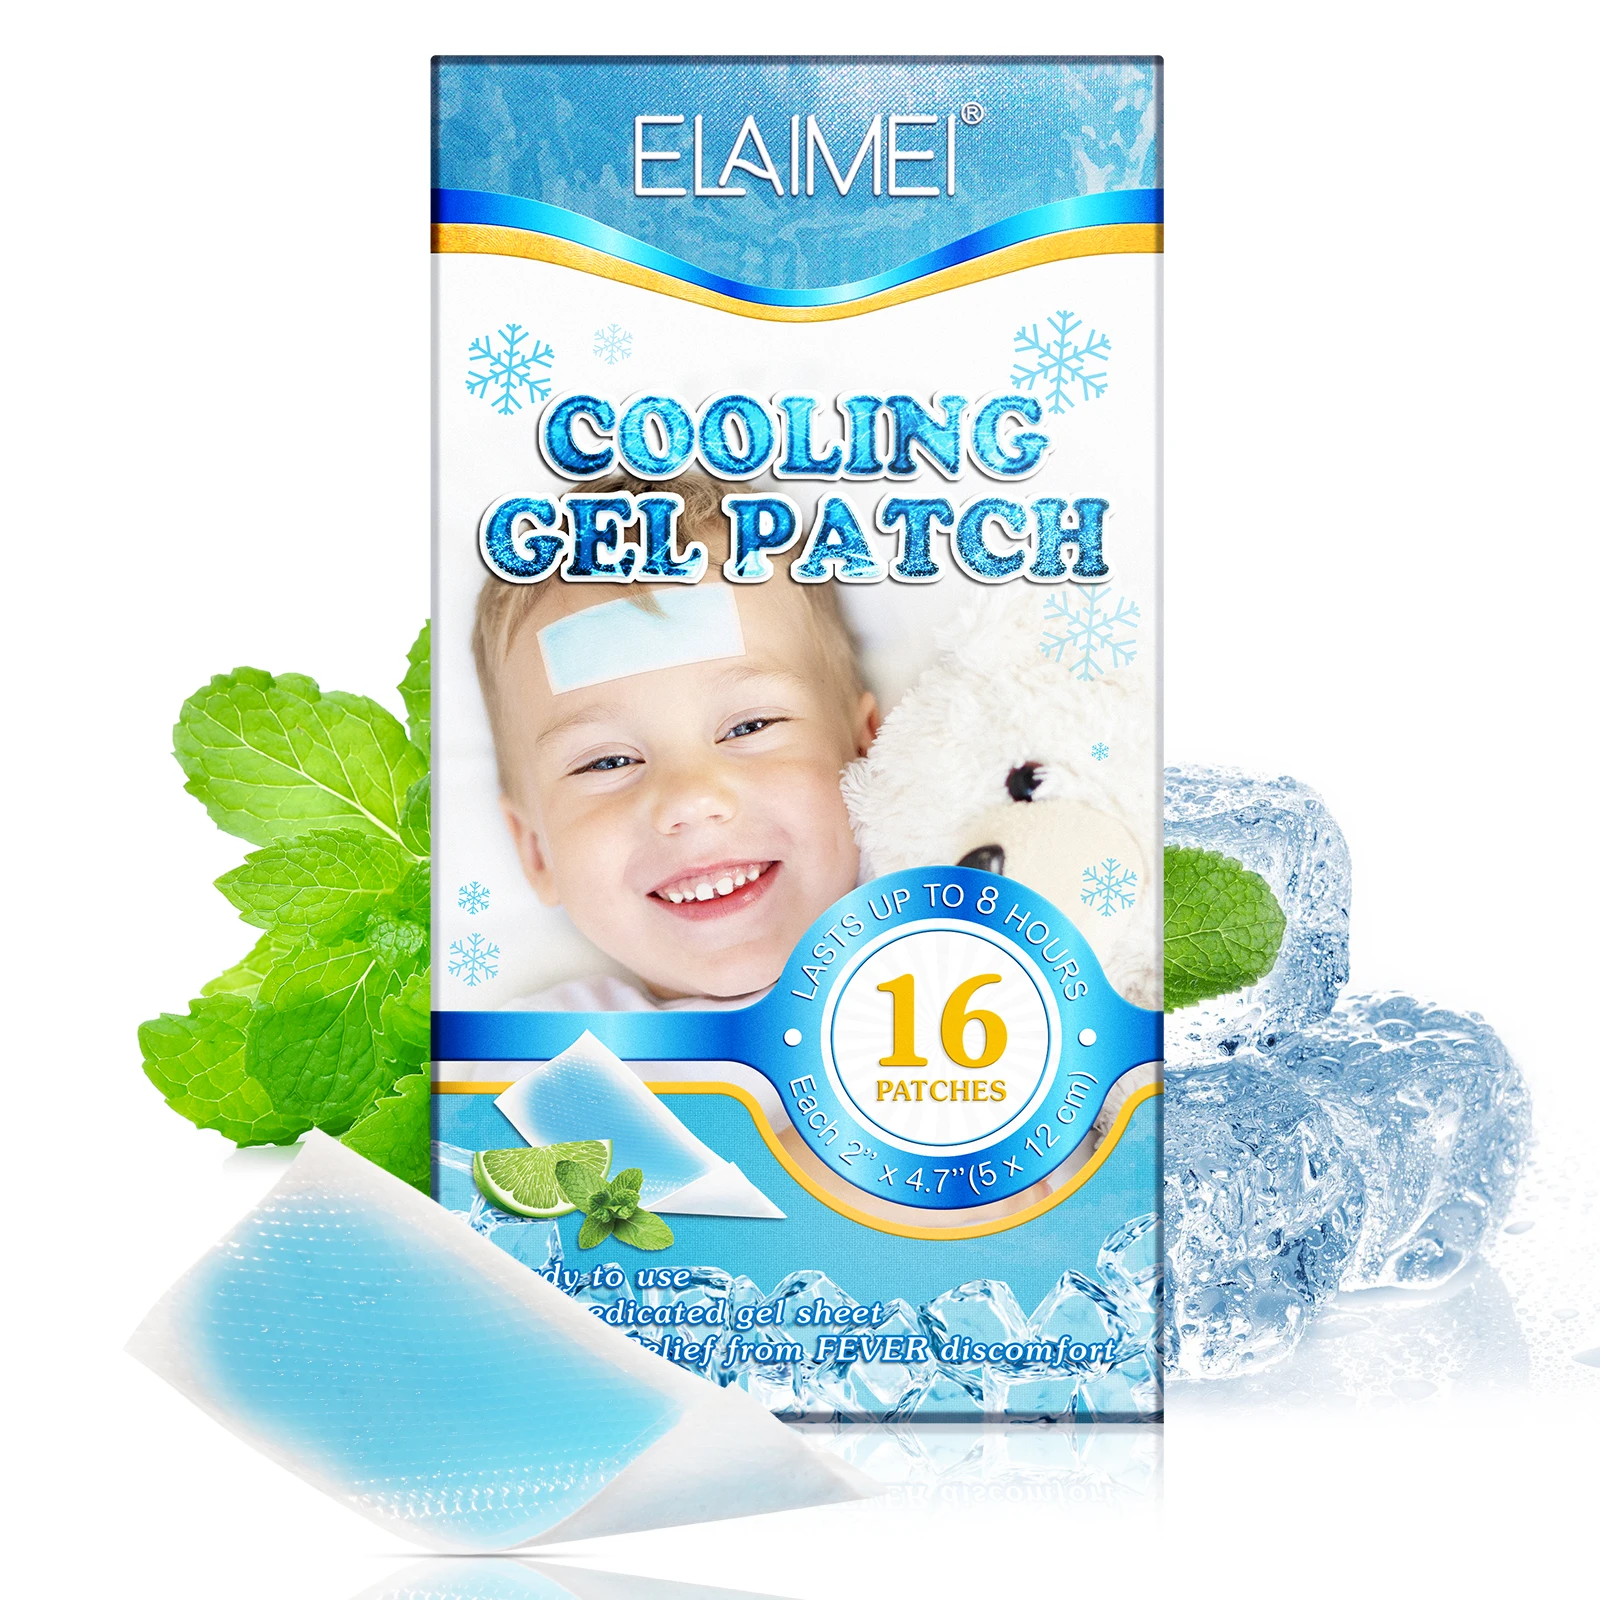 

ELAIMEI natural sleep patchreusable headache cooling padnon-medicated gel sheet hydrogel arthritis fever cooling patch